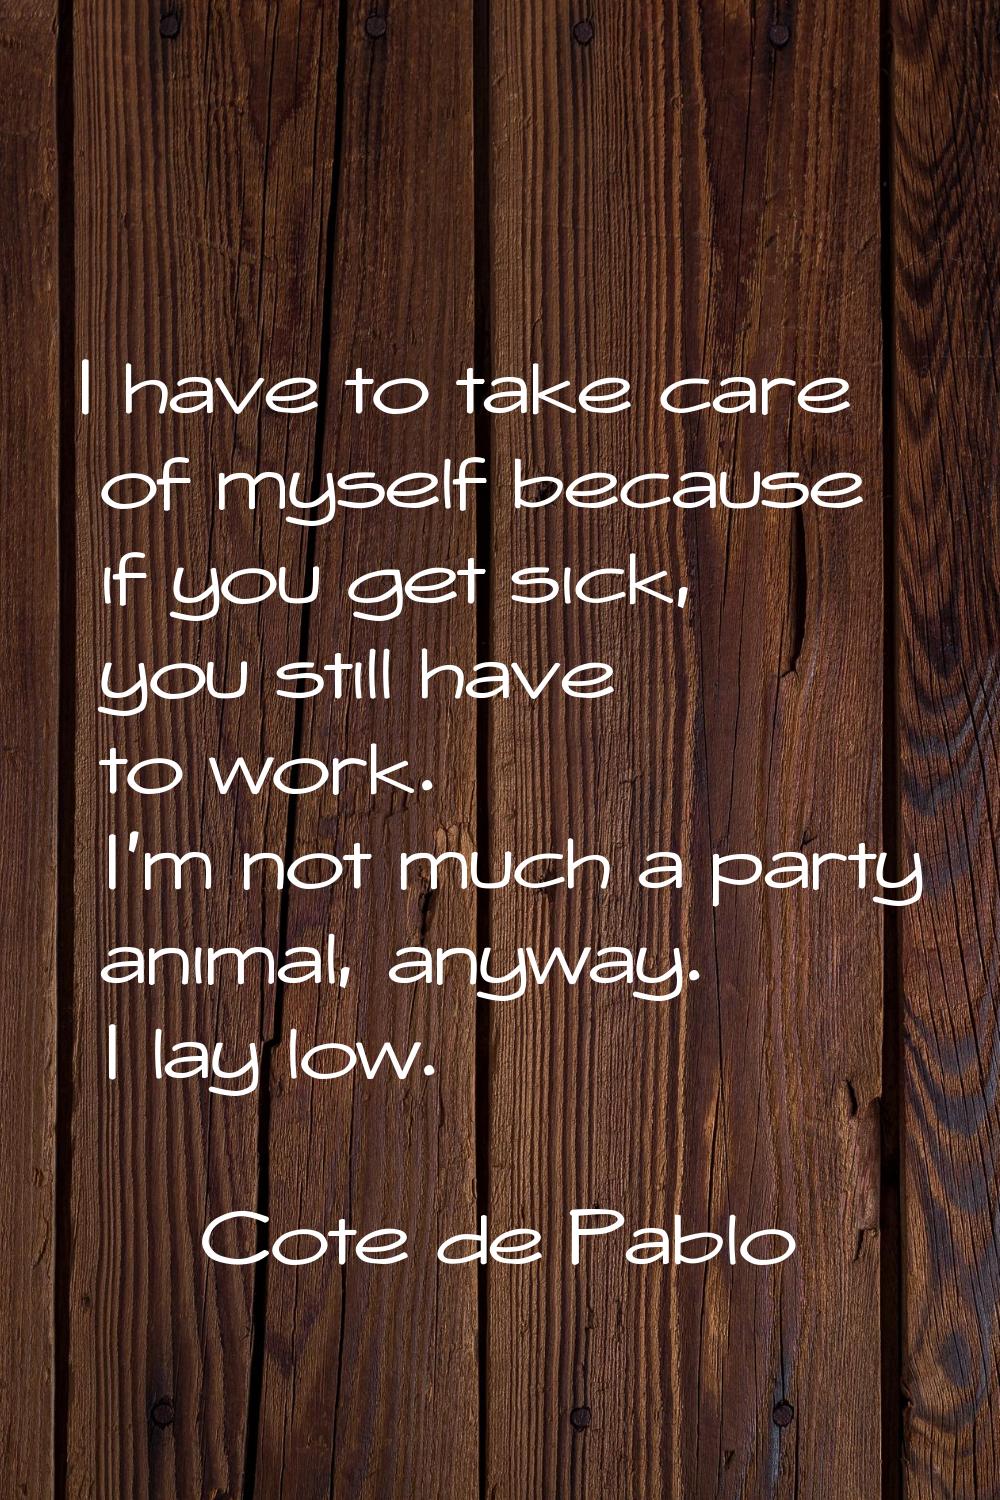 I have to take care of myself because if you get sick, you still have to work. I'm not much a party